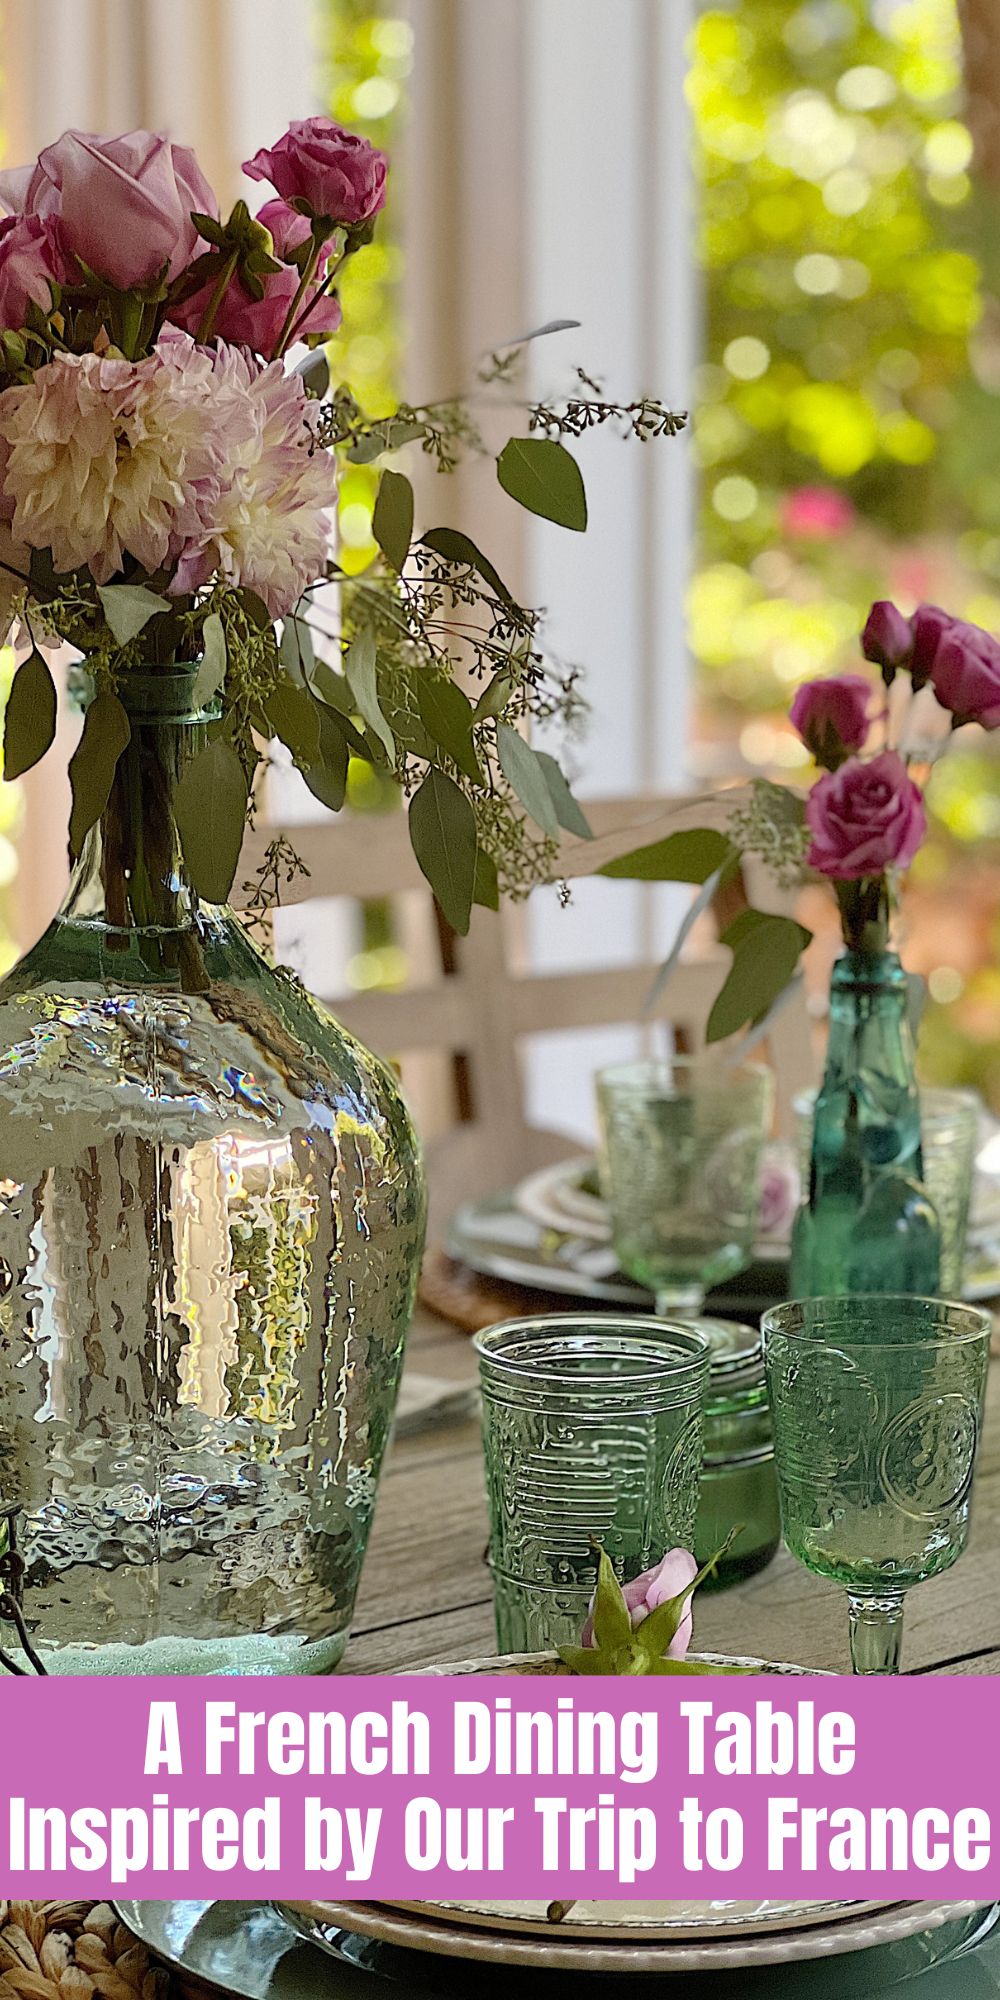 When we went to the Provence region of France this summer on a vintage flea market tour, we left feeling inspired to create our own French dining table.